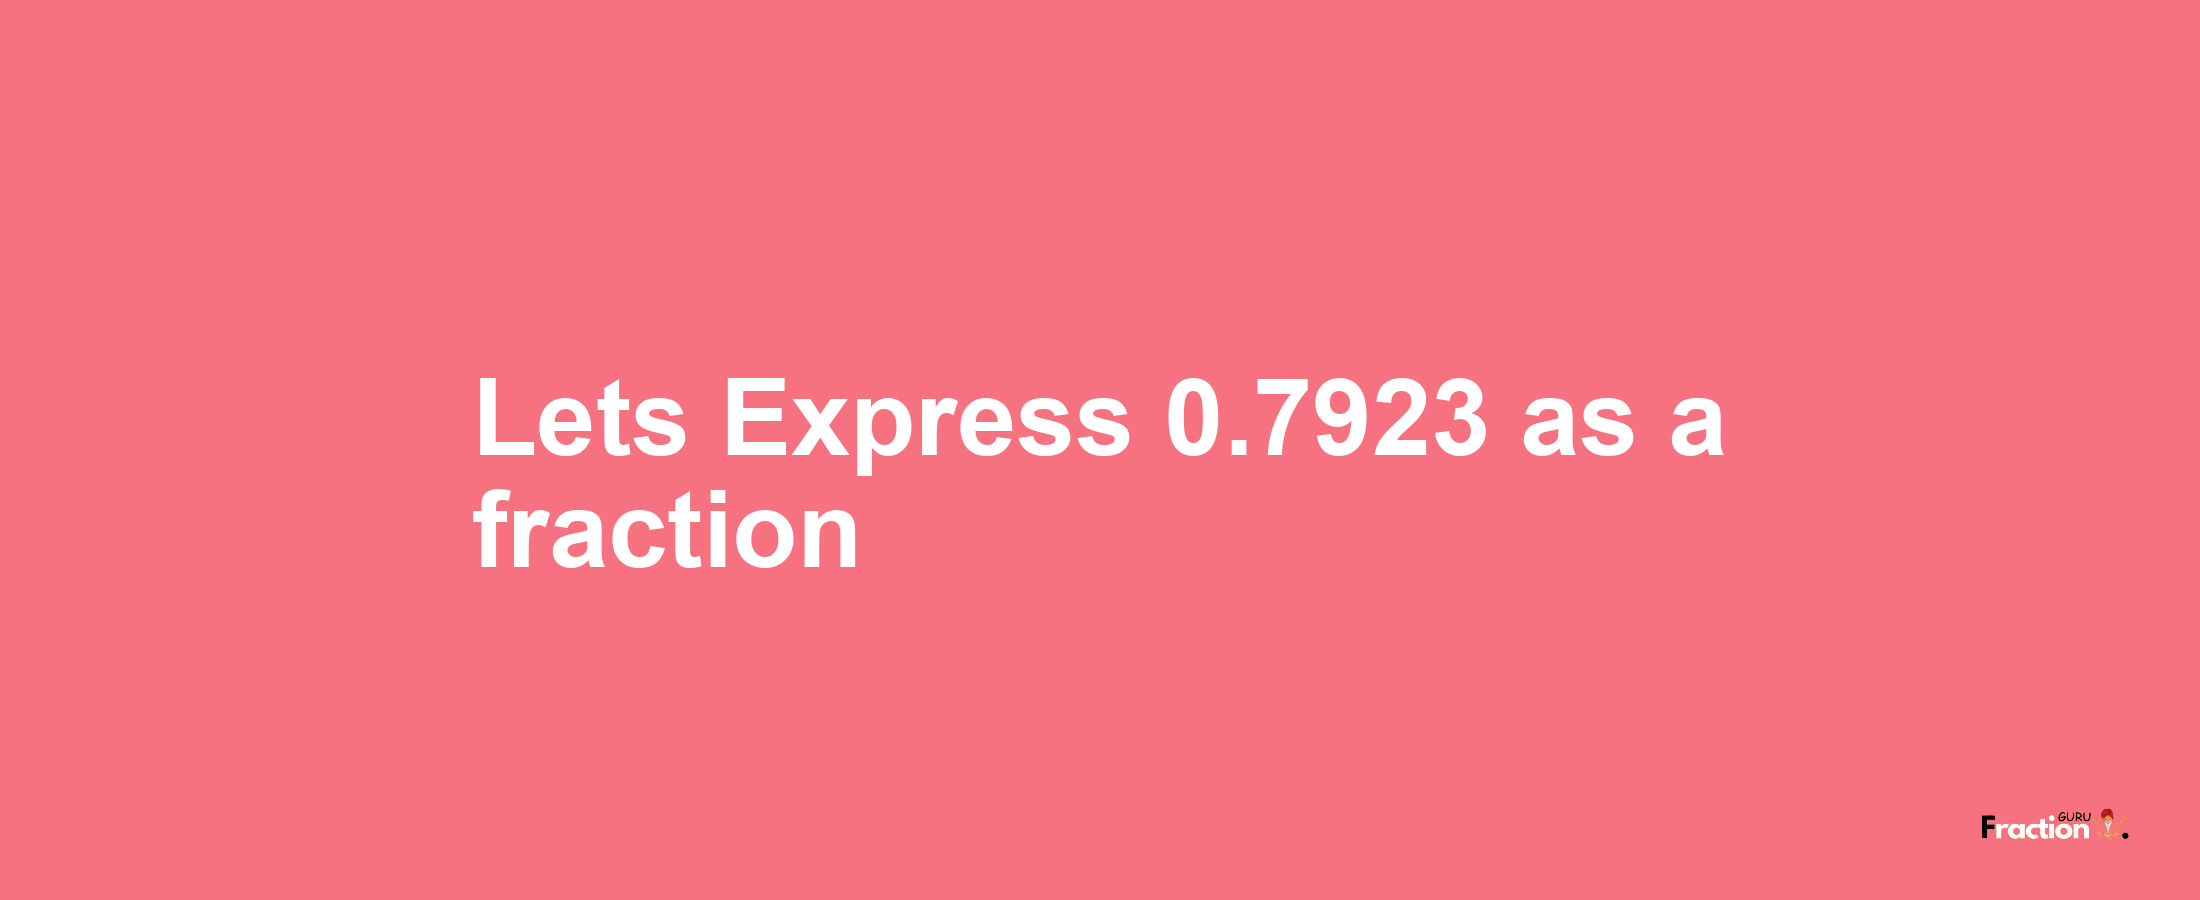 Lets Express 0.7923 as afraction